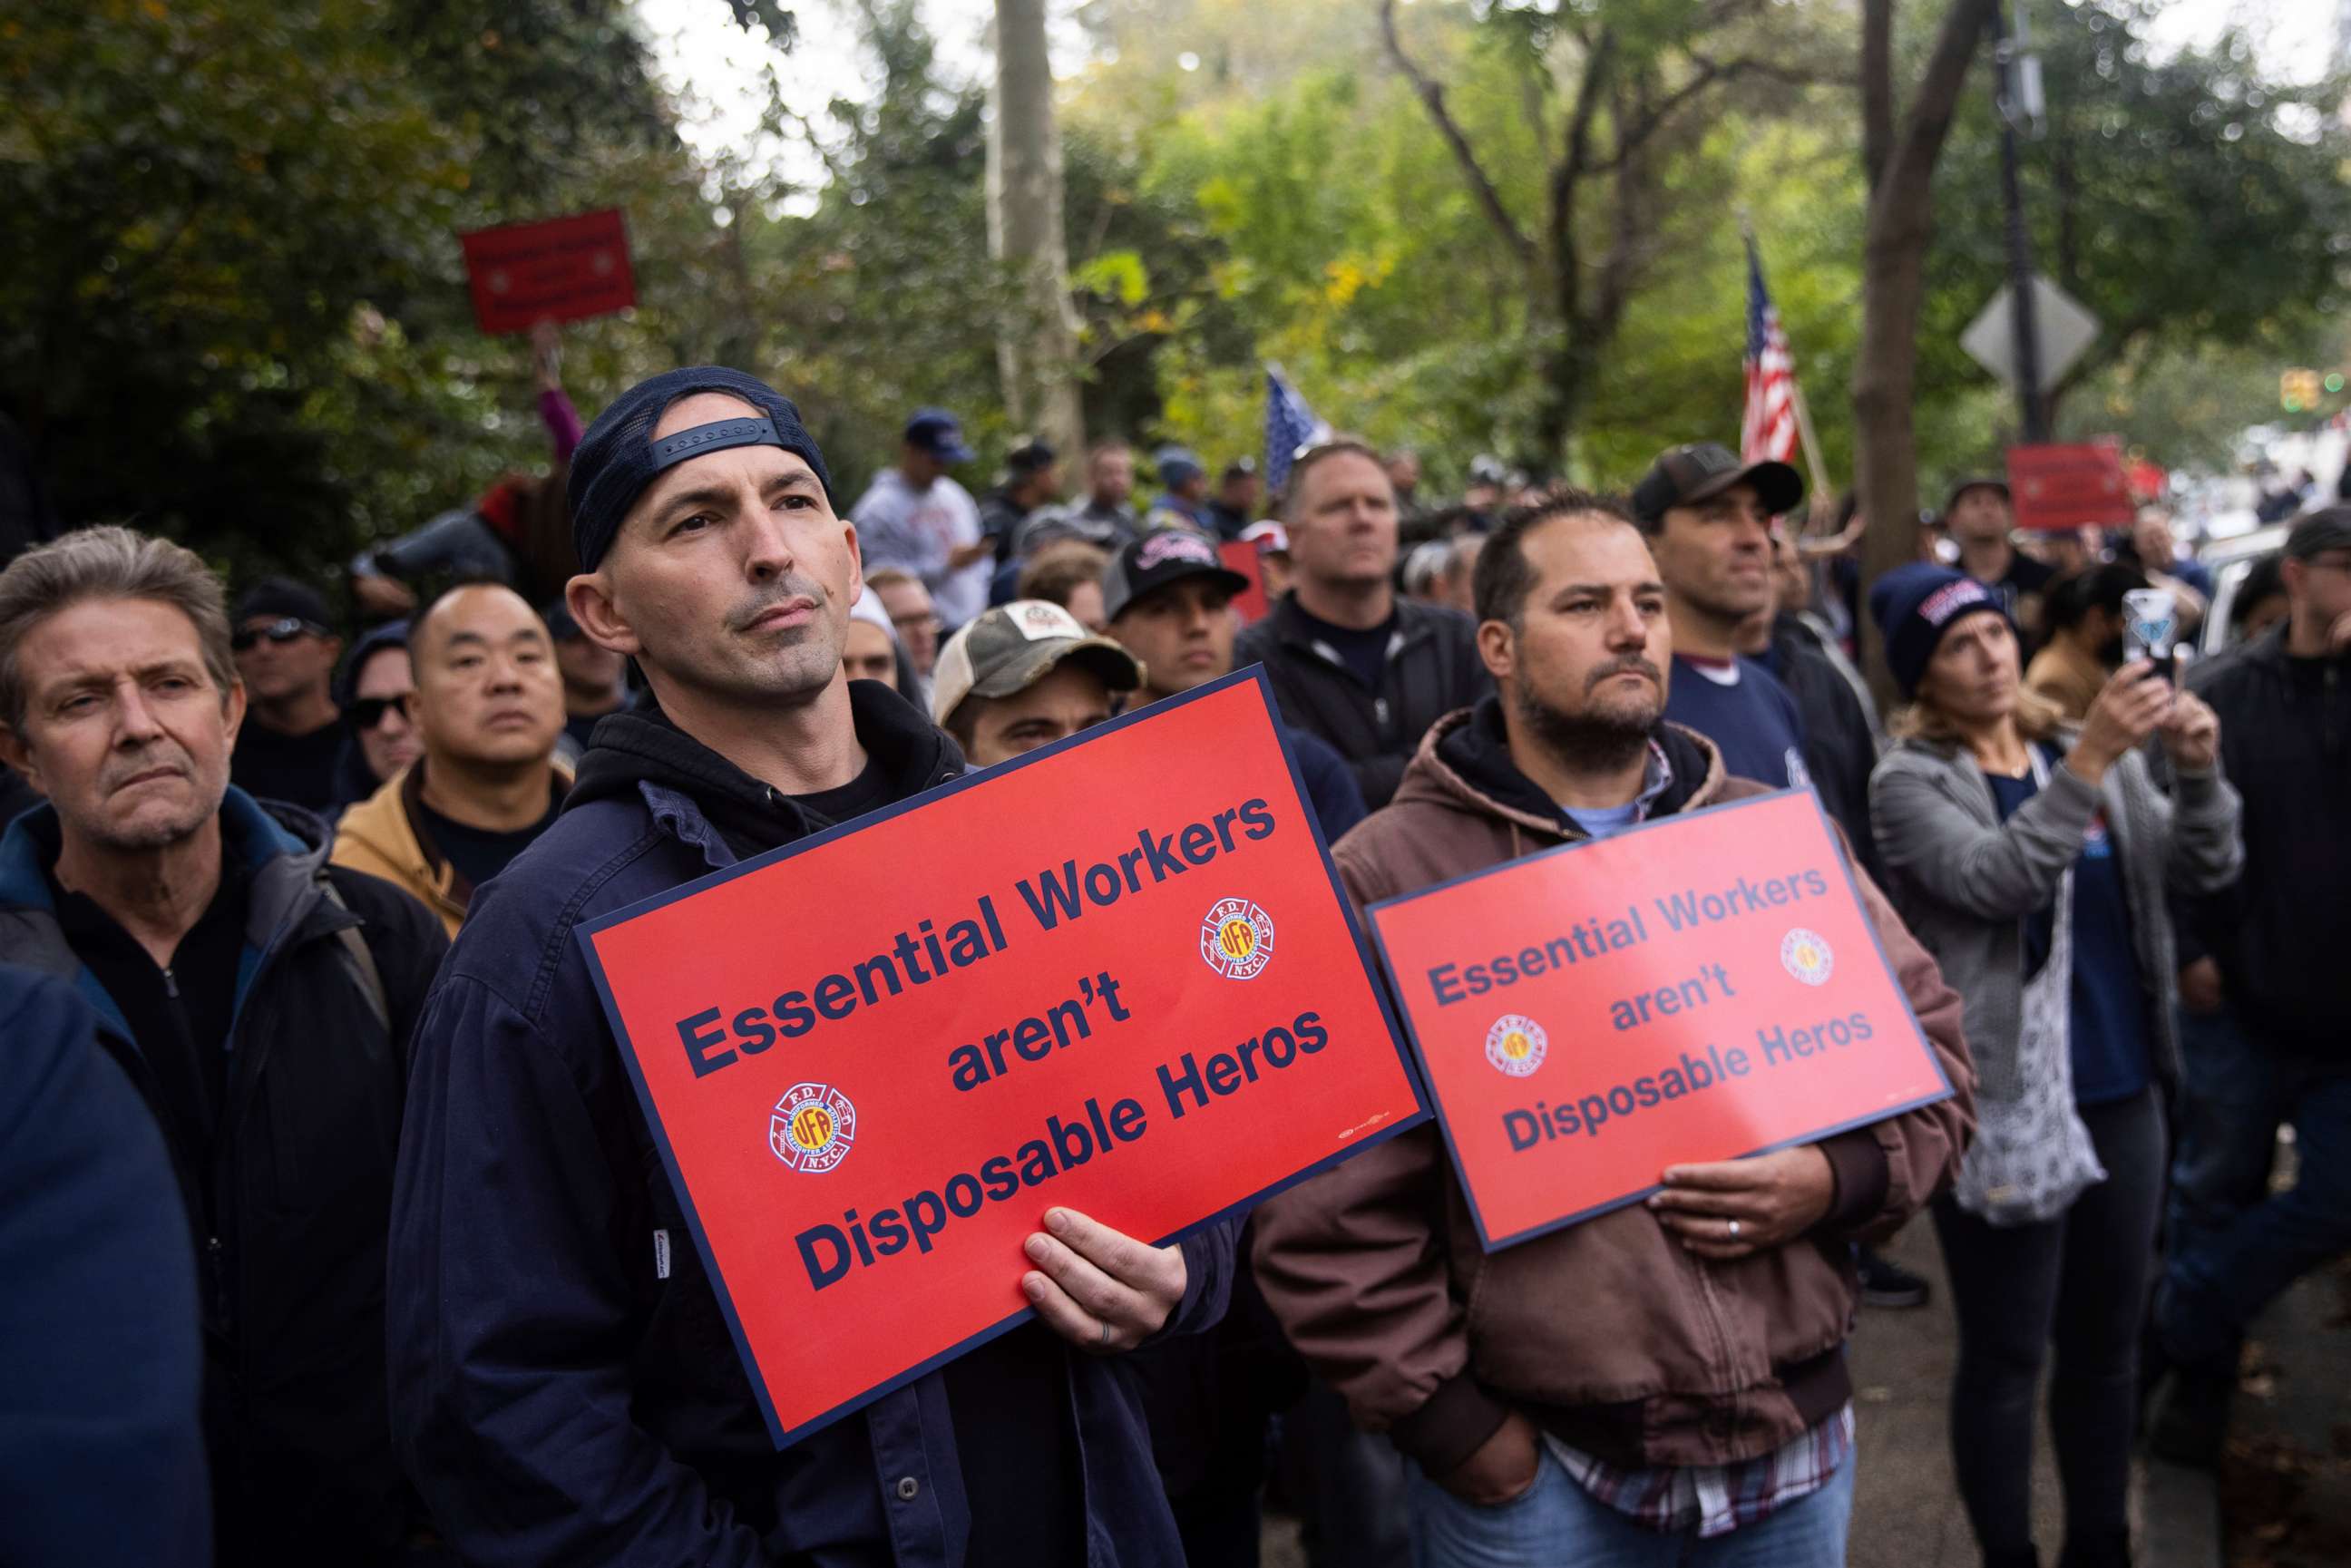 PHOTO: New York City municipal workers protest outside the Gracie Mansion Conservancy against the coming COVID-19 vaccine mandate for city workers, Oct. 28, 2021, in New York.